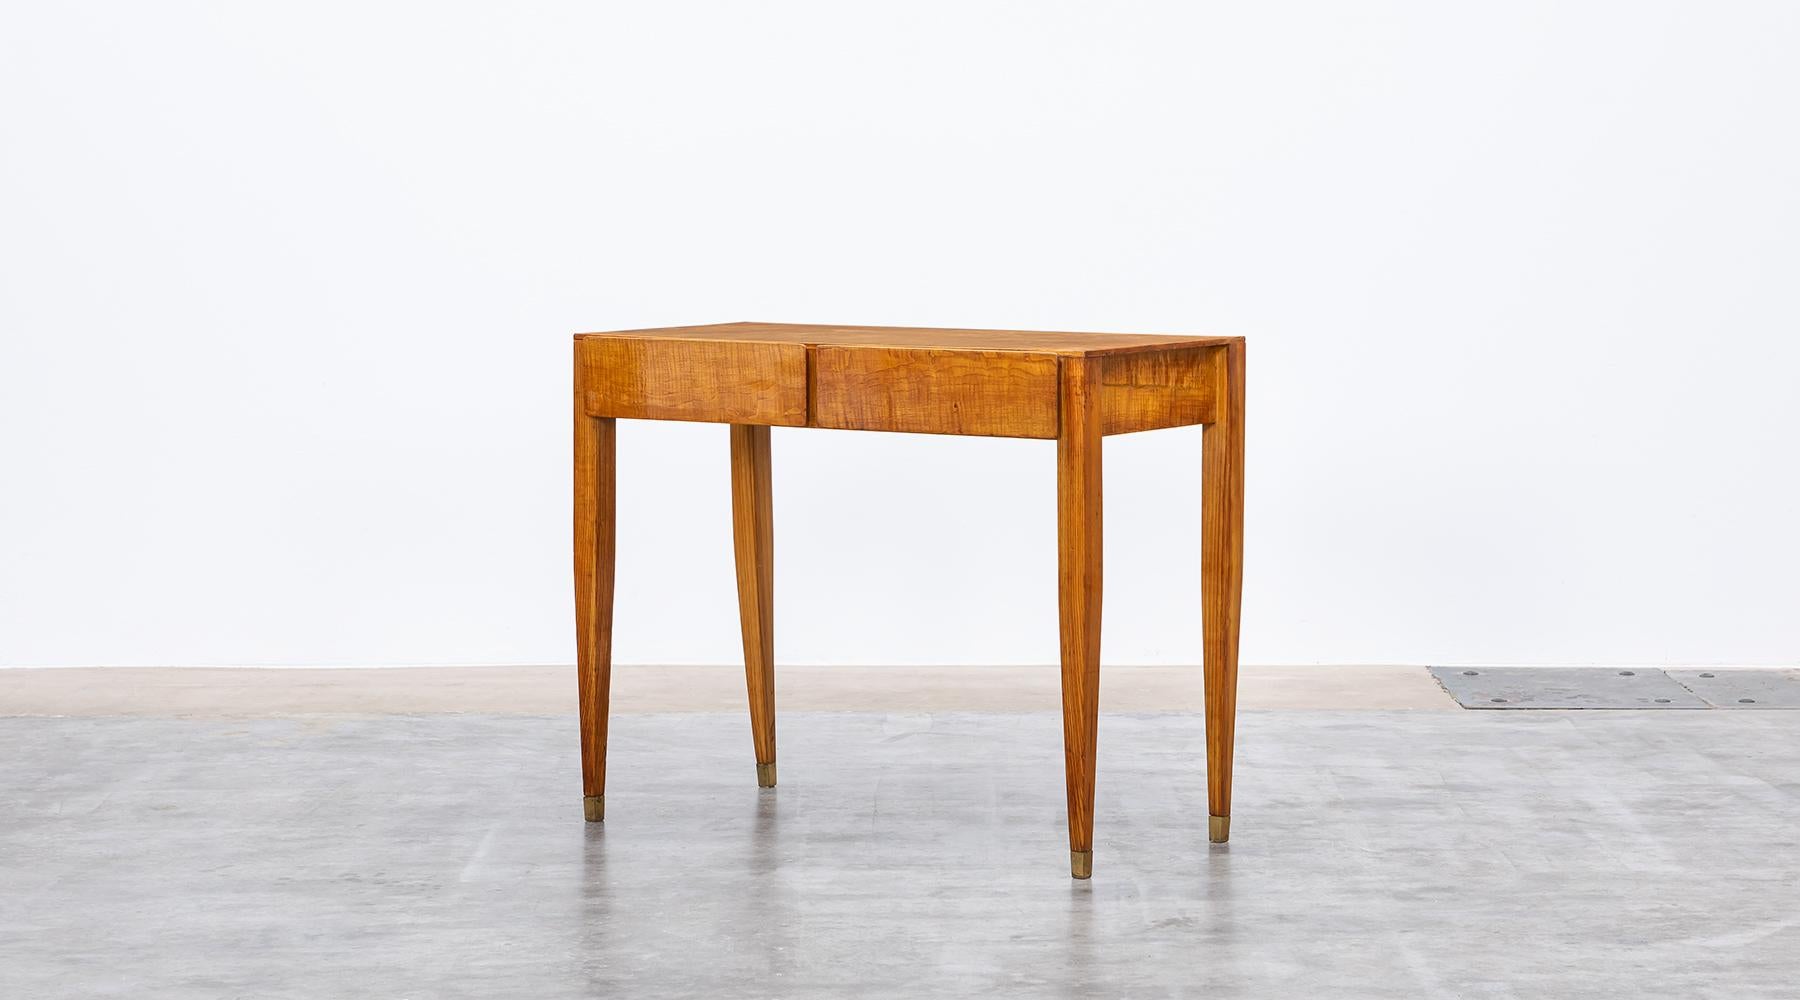 Console or side table, ash, two drawers, Gio Ponti, Italy, 1953.

A beautiful side table or console made of ash, designed by the famous Gio Ponti. The unusual height enhances the elegance of the object. This object is from a furniture series once